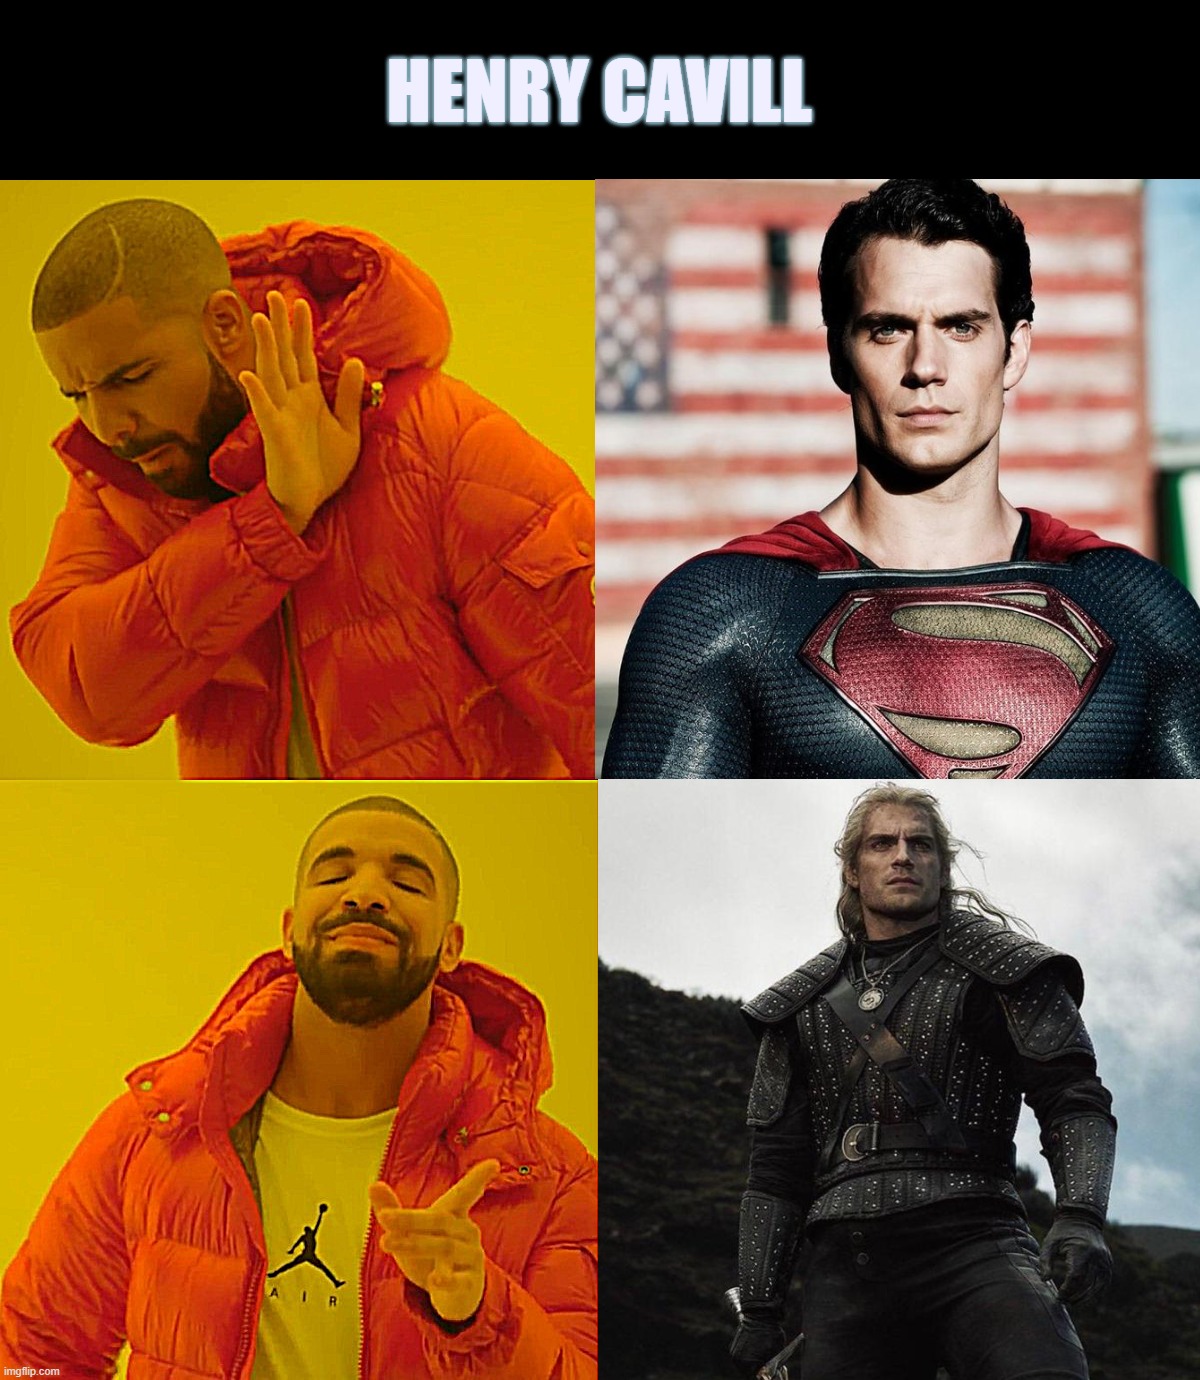 Drake Hotline Bling | HENRY CAVILL | image tagged in drake hotline bling,henry cavill,superman,witcher,the witcher,witcher 3 | made w/ Imgflip meme maker